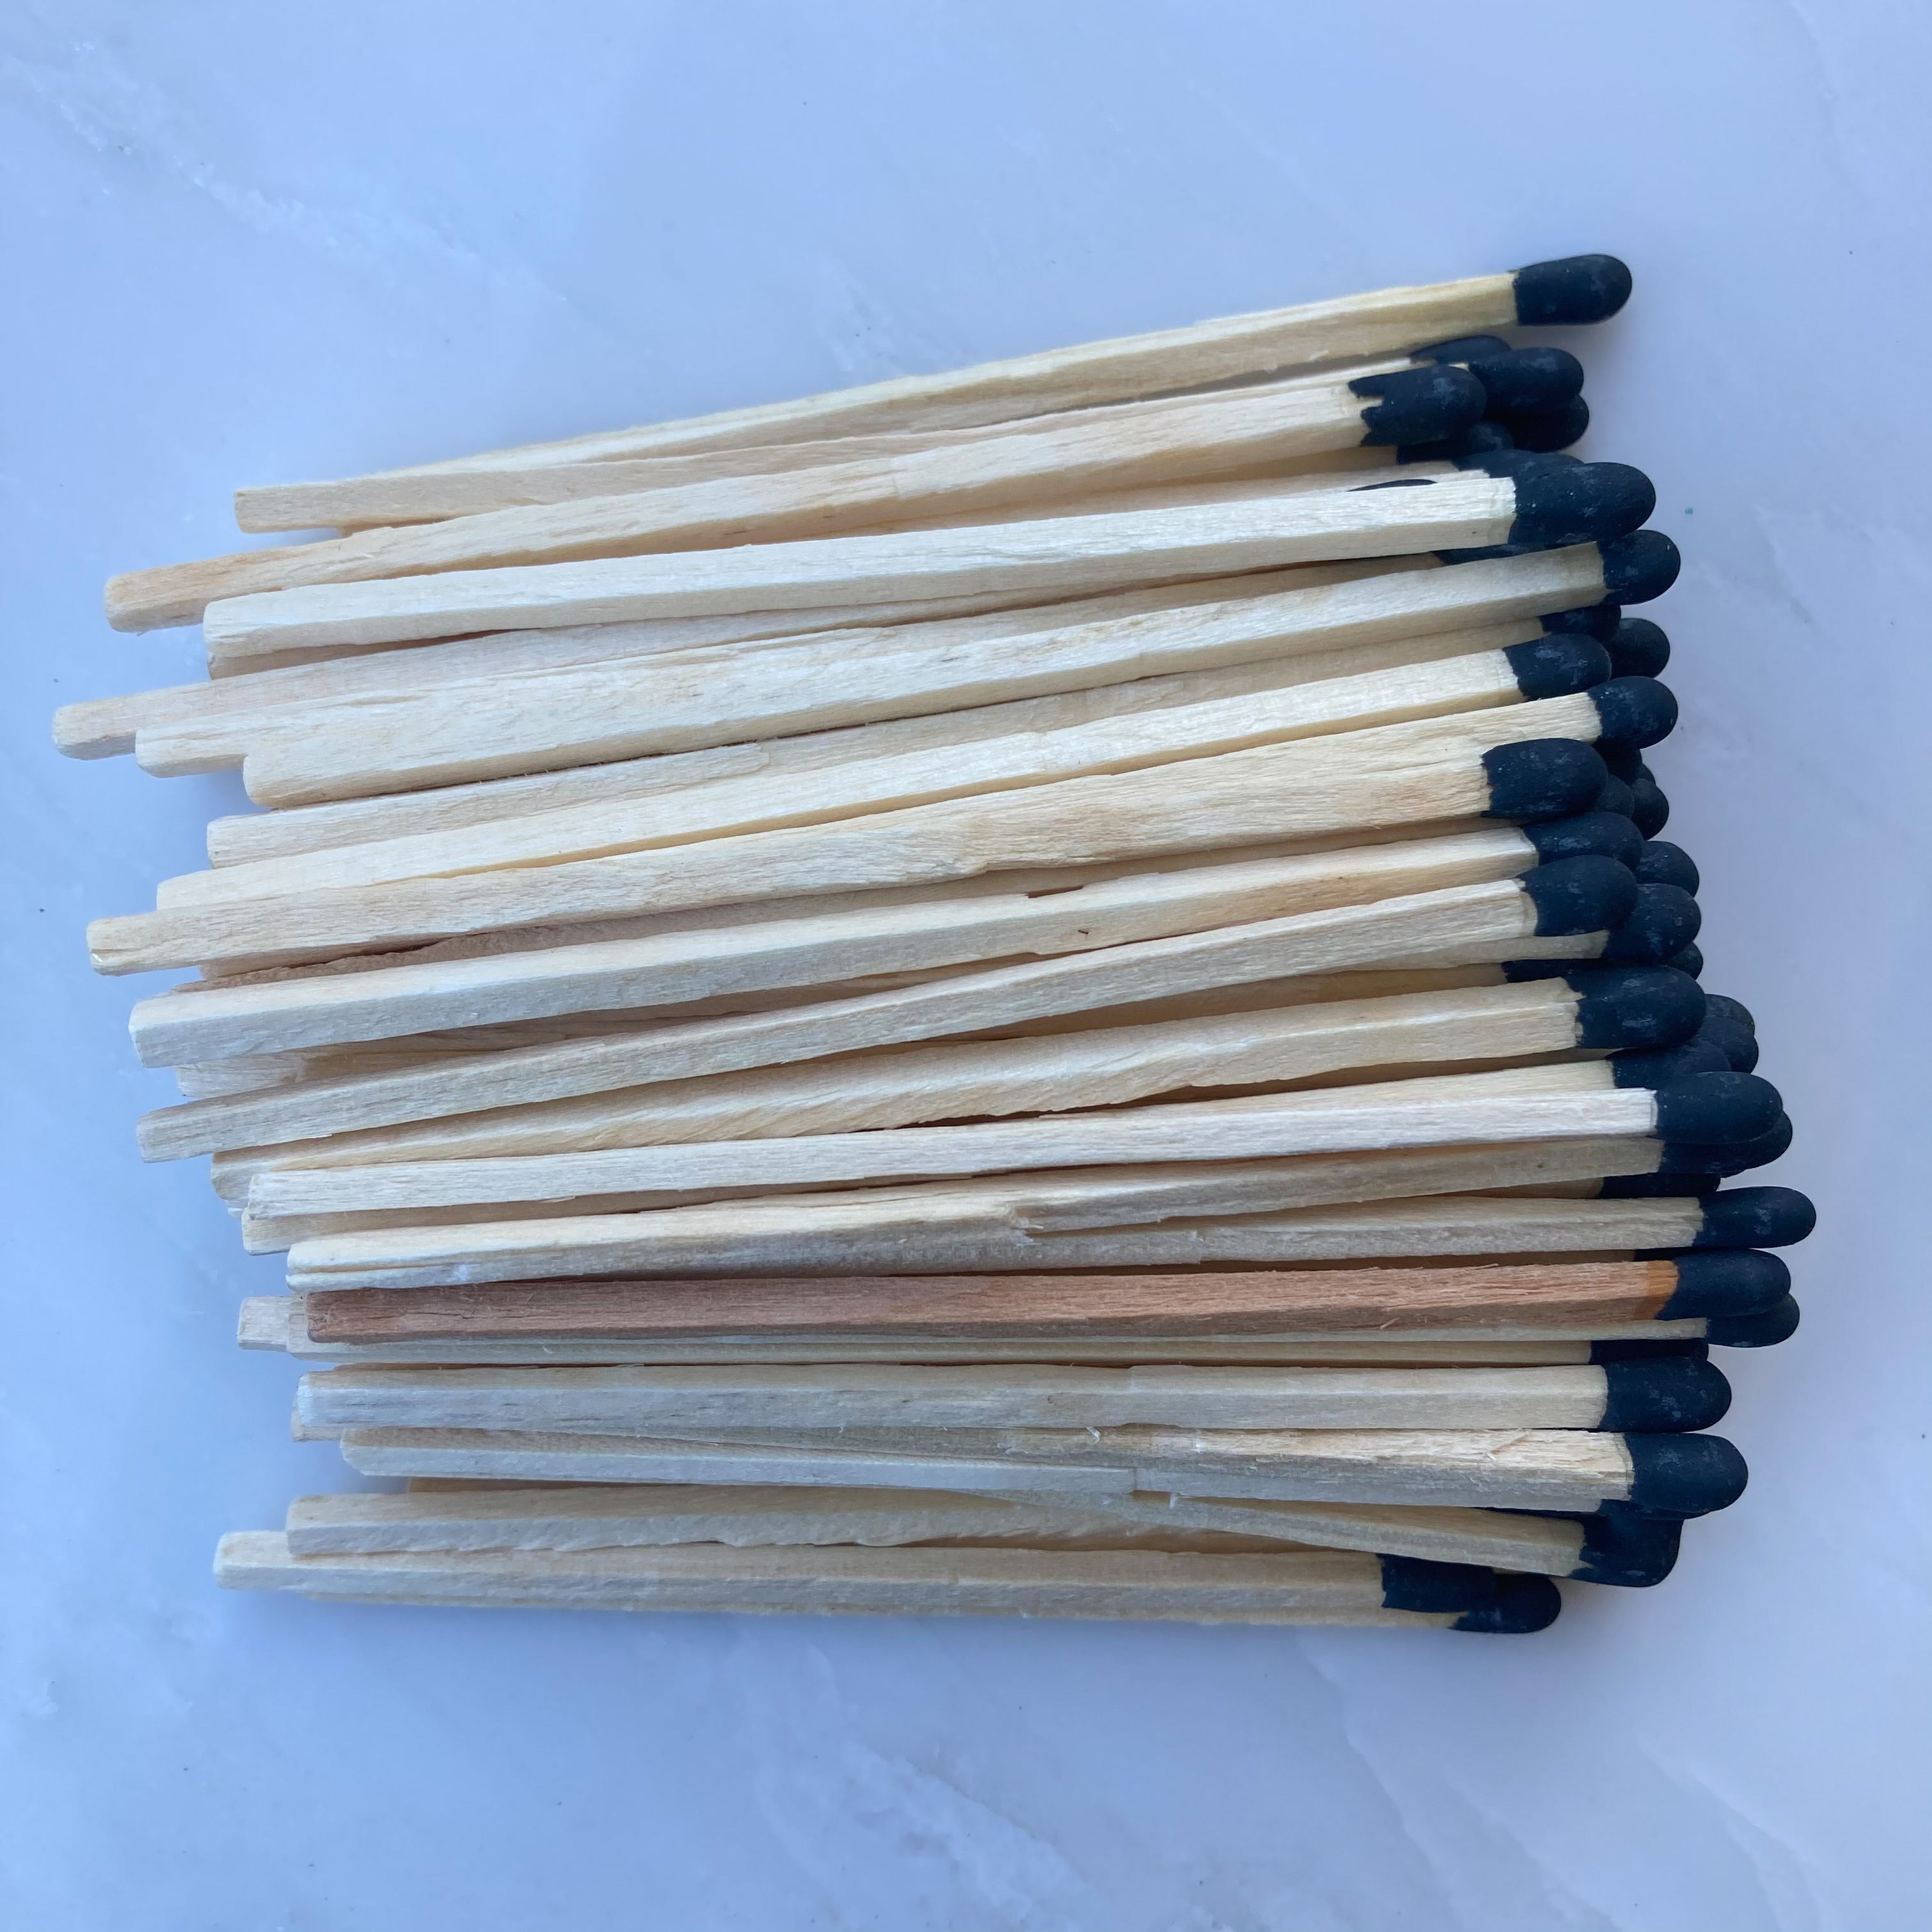 3.5" REFILL MATCHSTICKS. 100 Safety Matches to Refill Your Apothecary or Modern Match Bottle.